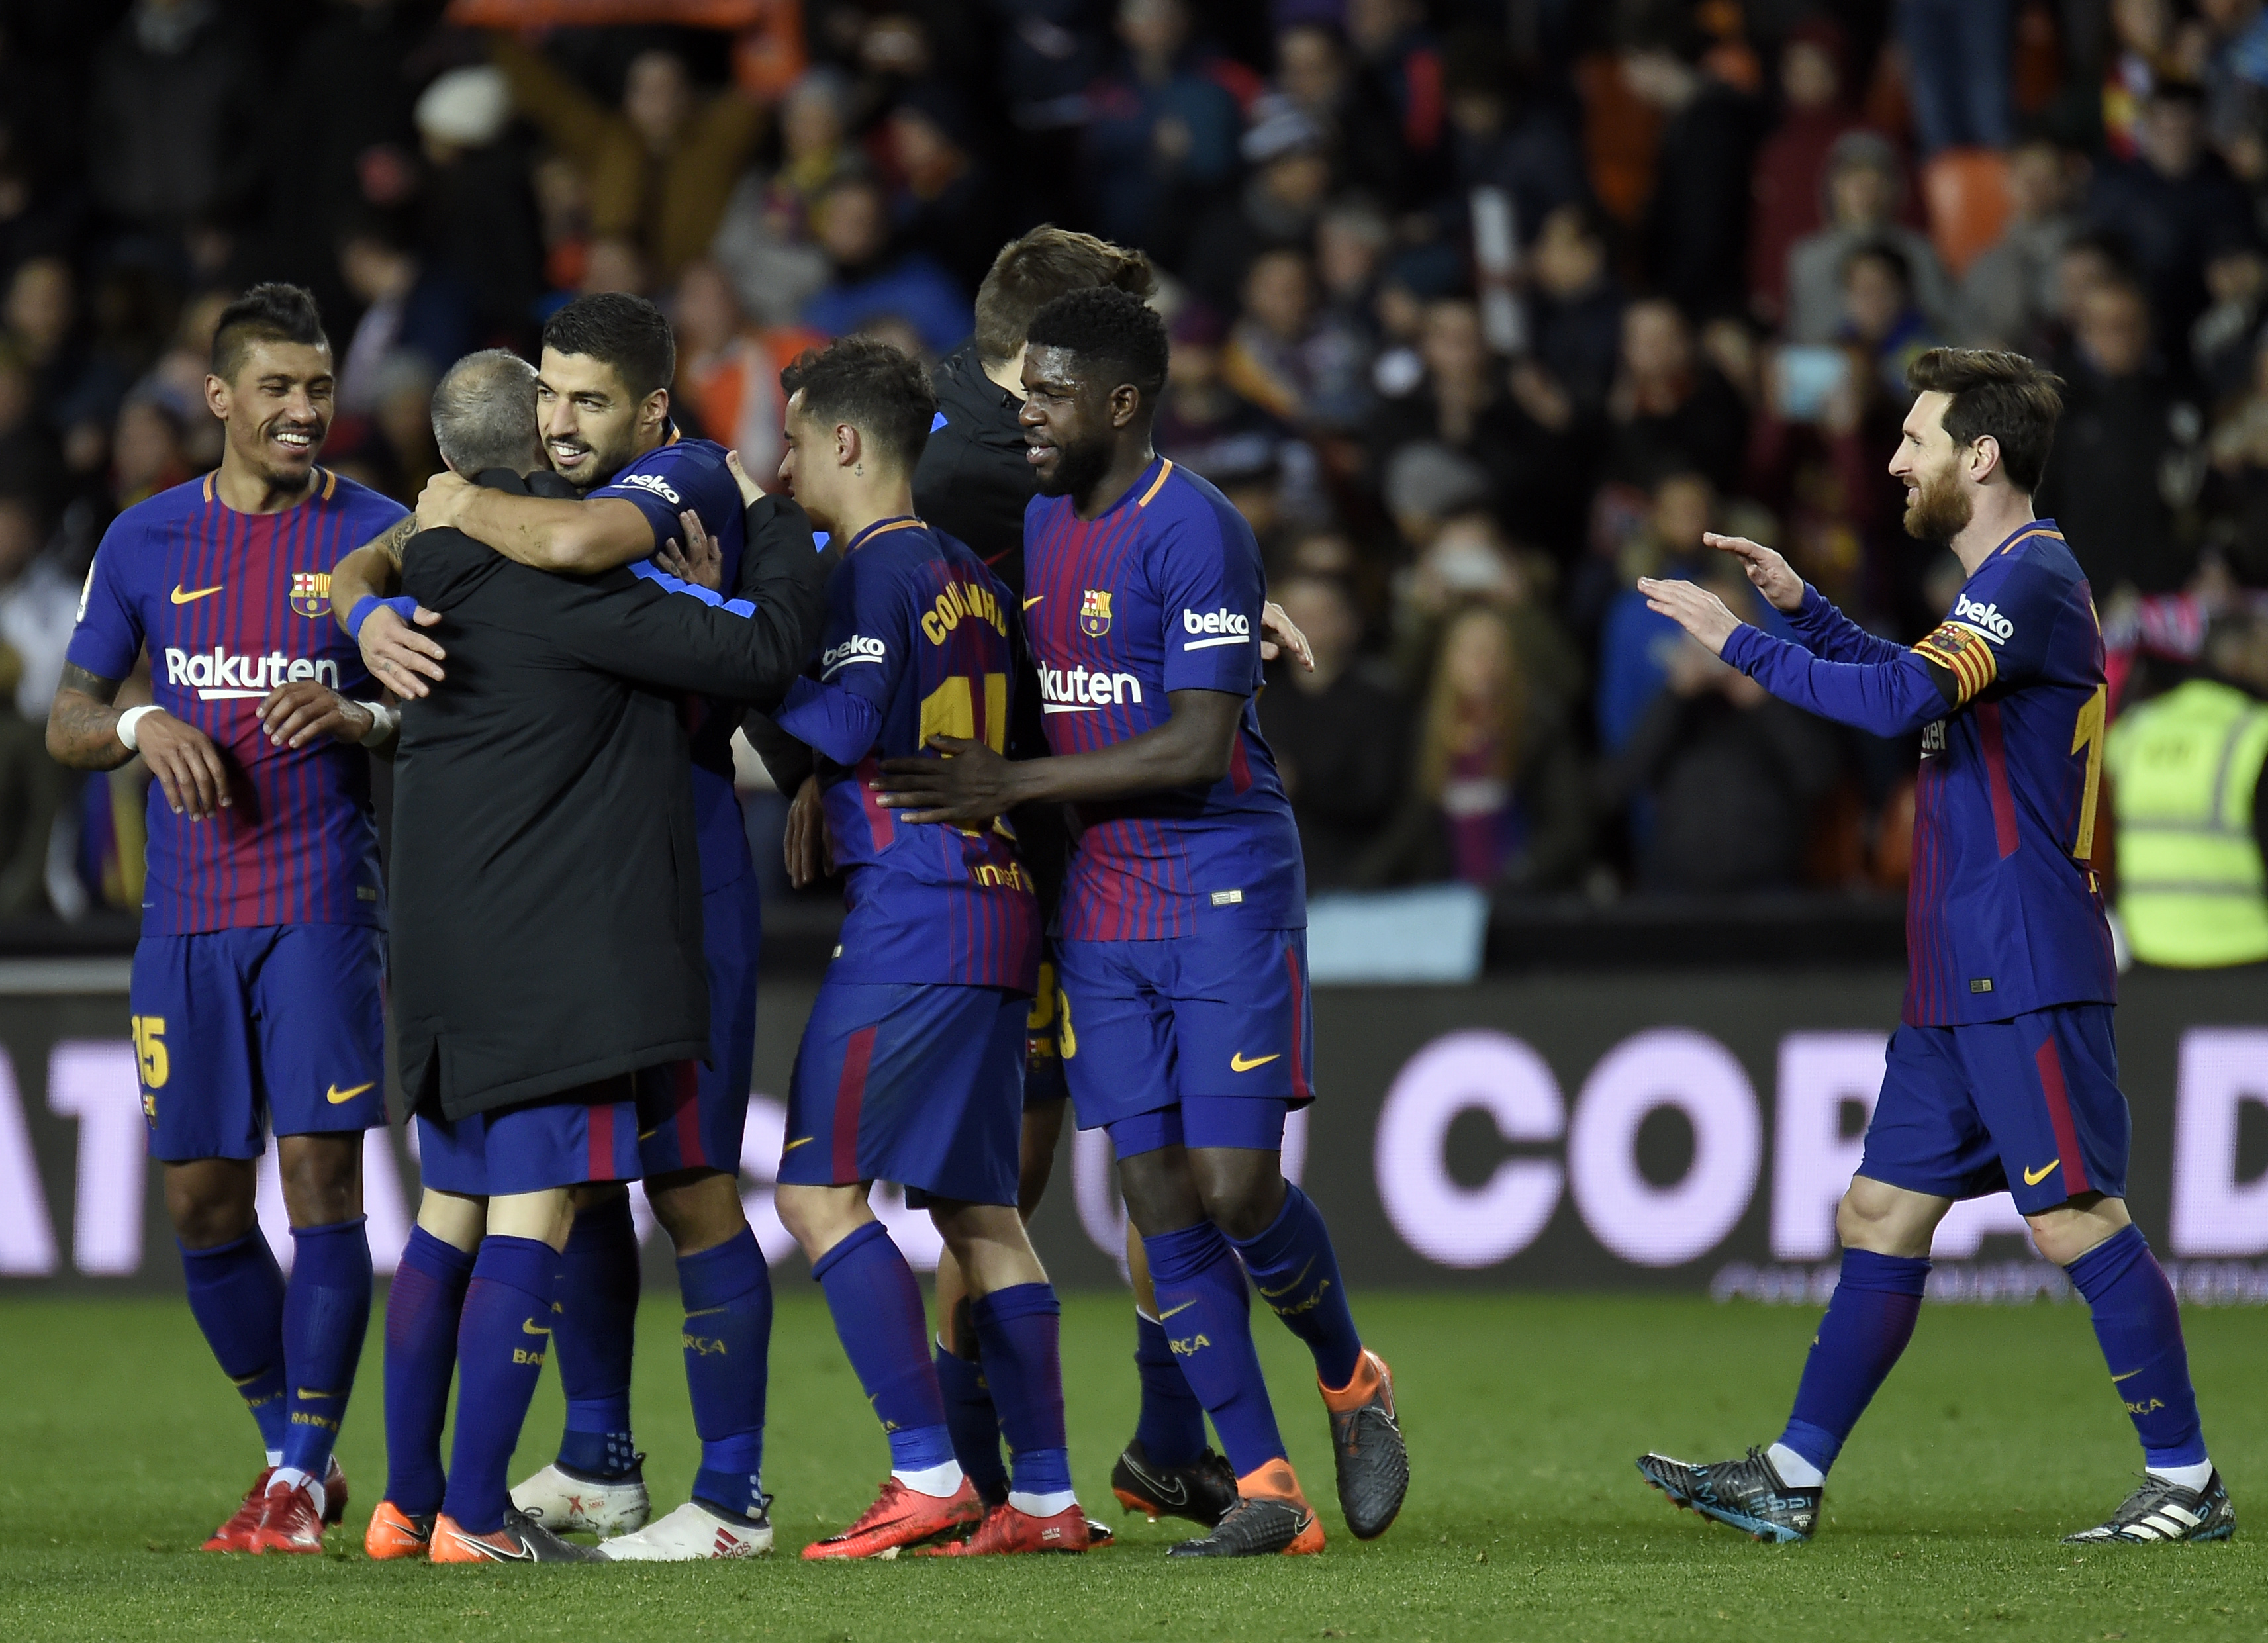 Barcelona players celebrate their qualification for the final match after the Spanish 'Copa del Rey' (King's cup) second leg semi-final football match between Valencia CF and FC Barcelona at the Mestalla stadium in Valencia on February 8, 2018. / AFP PHOTO / JOSE JORDAN        (Photo credit should read JOSE JORDAN/AFP/Getty Images)